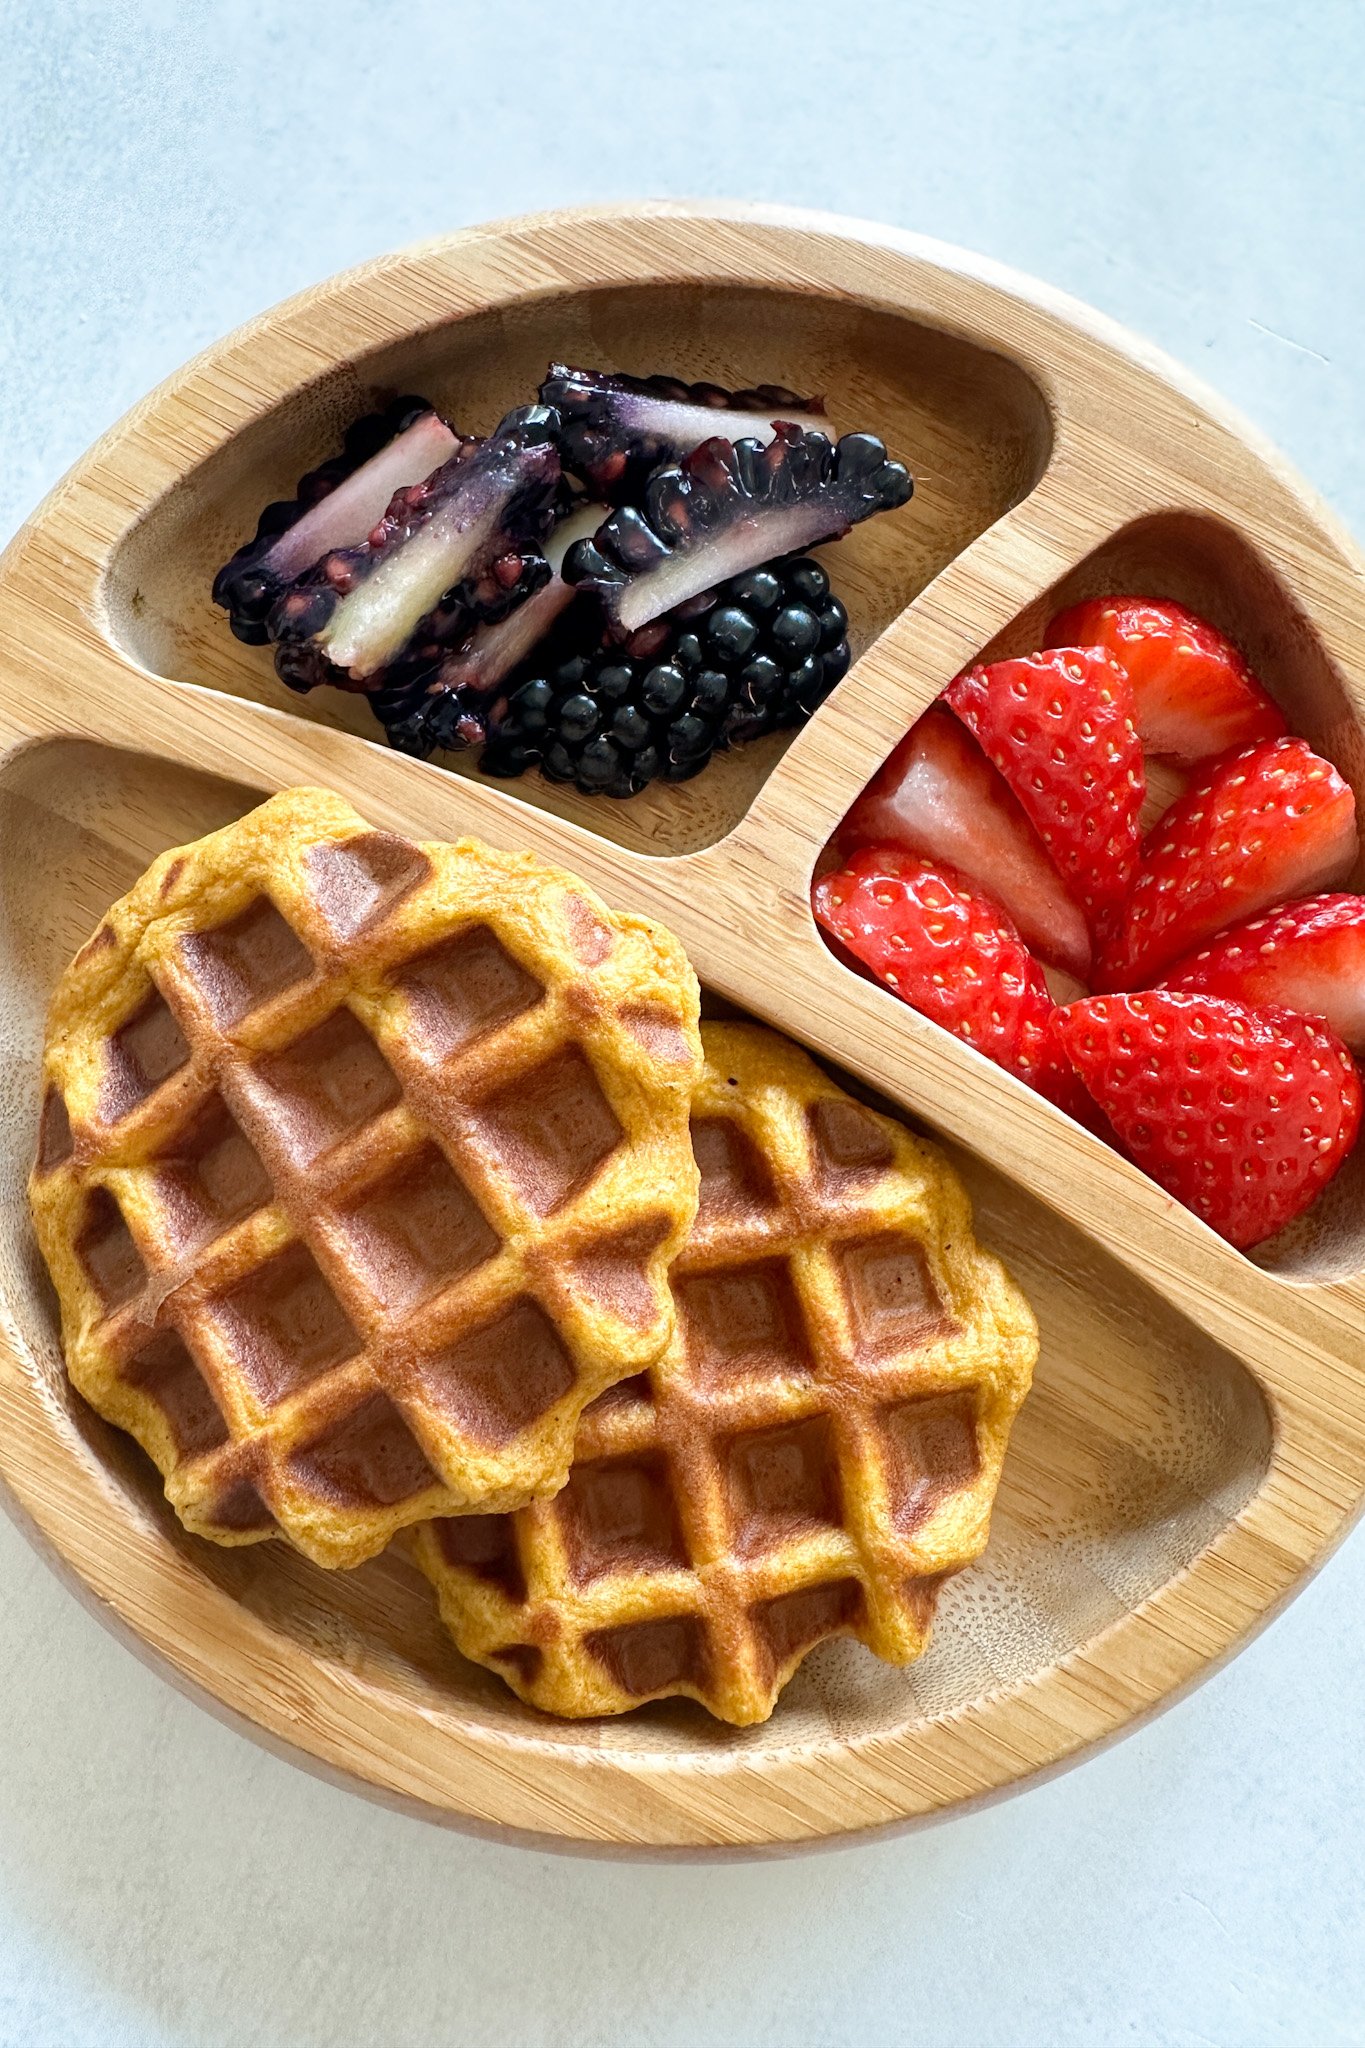 Sweet potato waffles served with strawberries and blackberries.